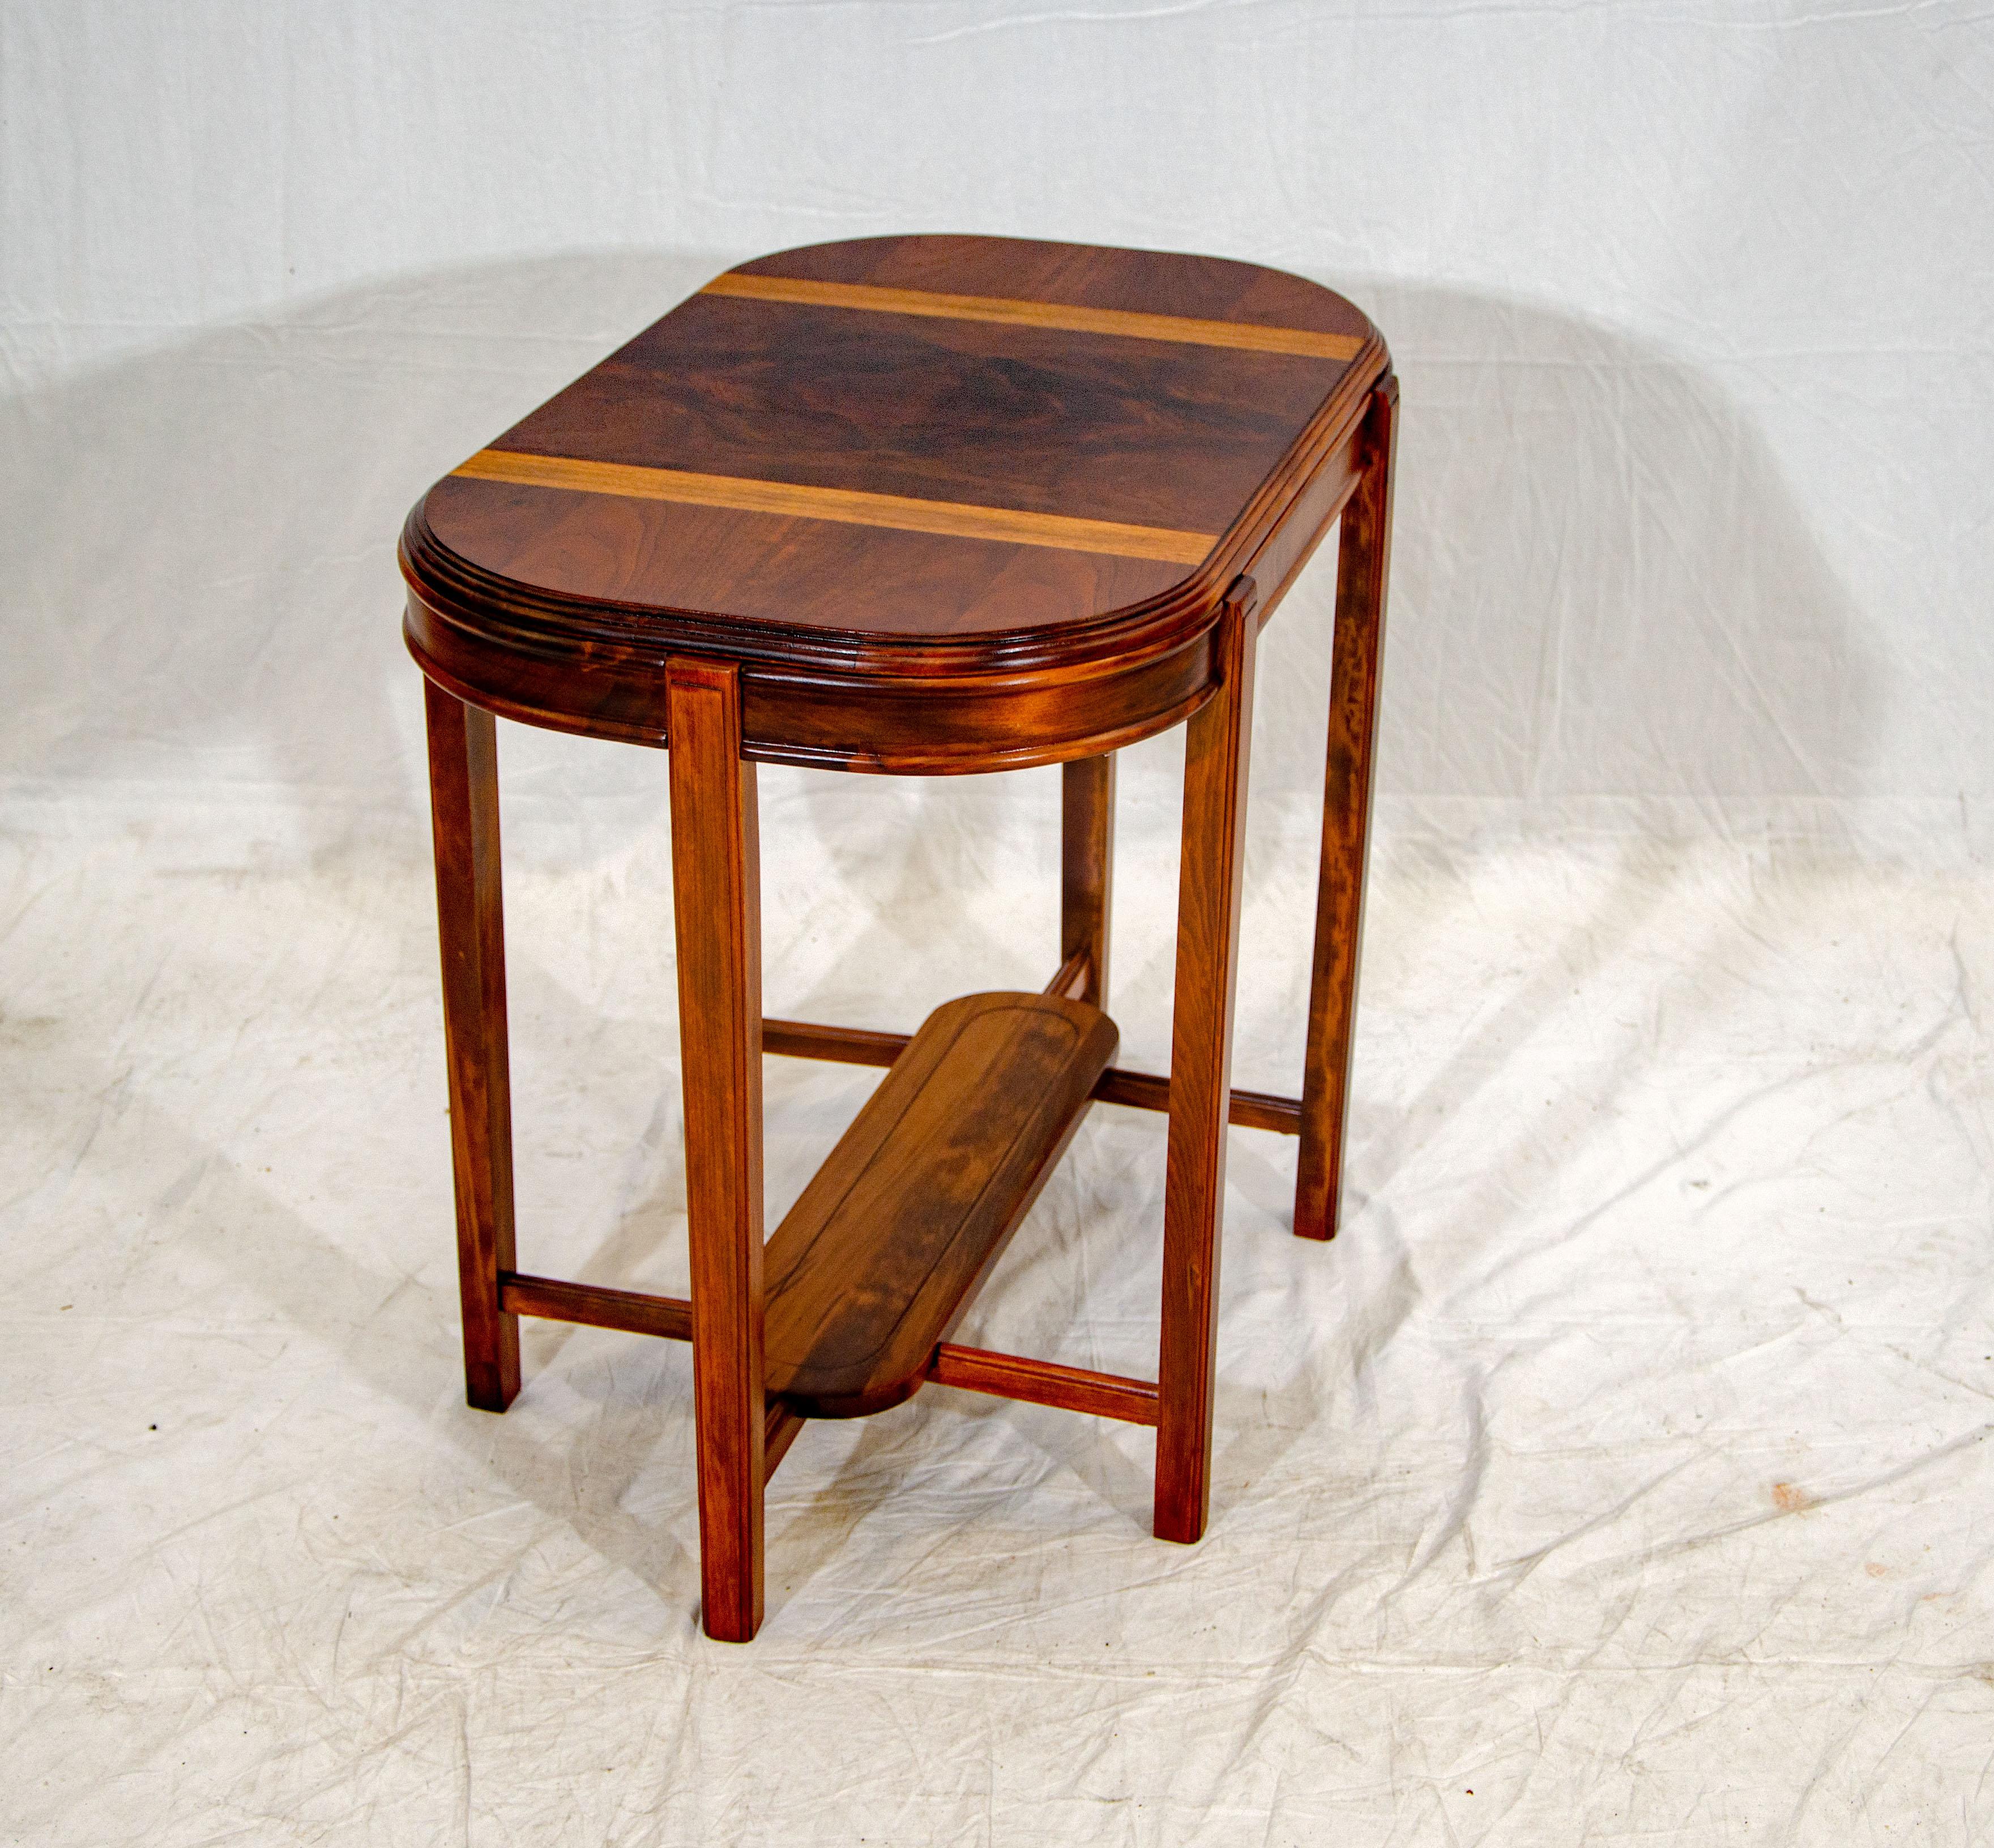 The tabletop has a burled walnut center, bleached walnut stripes, and walnut ends. The accent edges are stepped around the racetrack shaped top. The apron measures 3